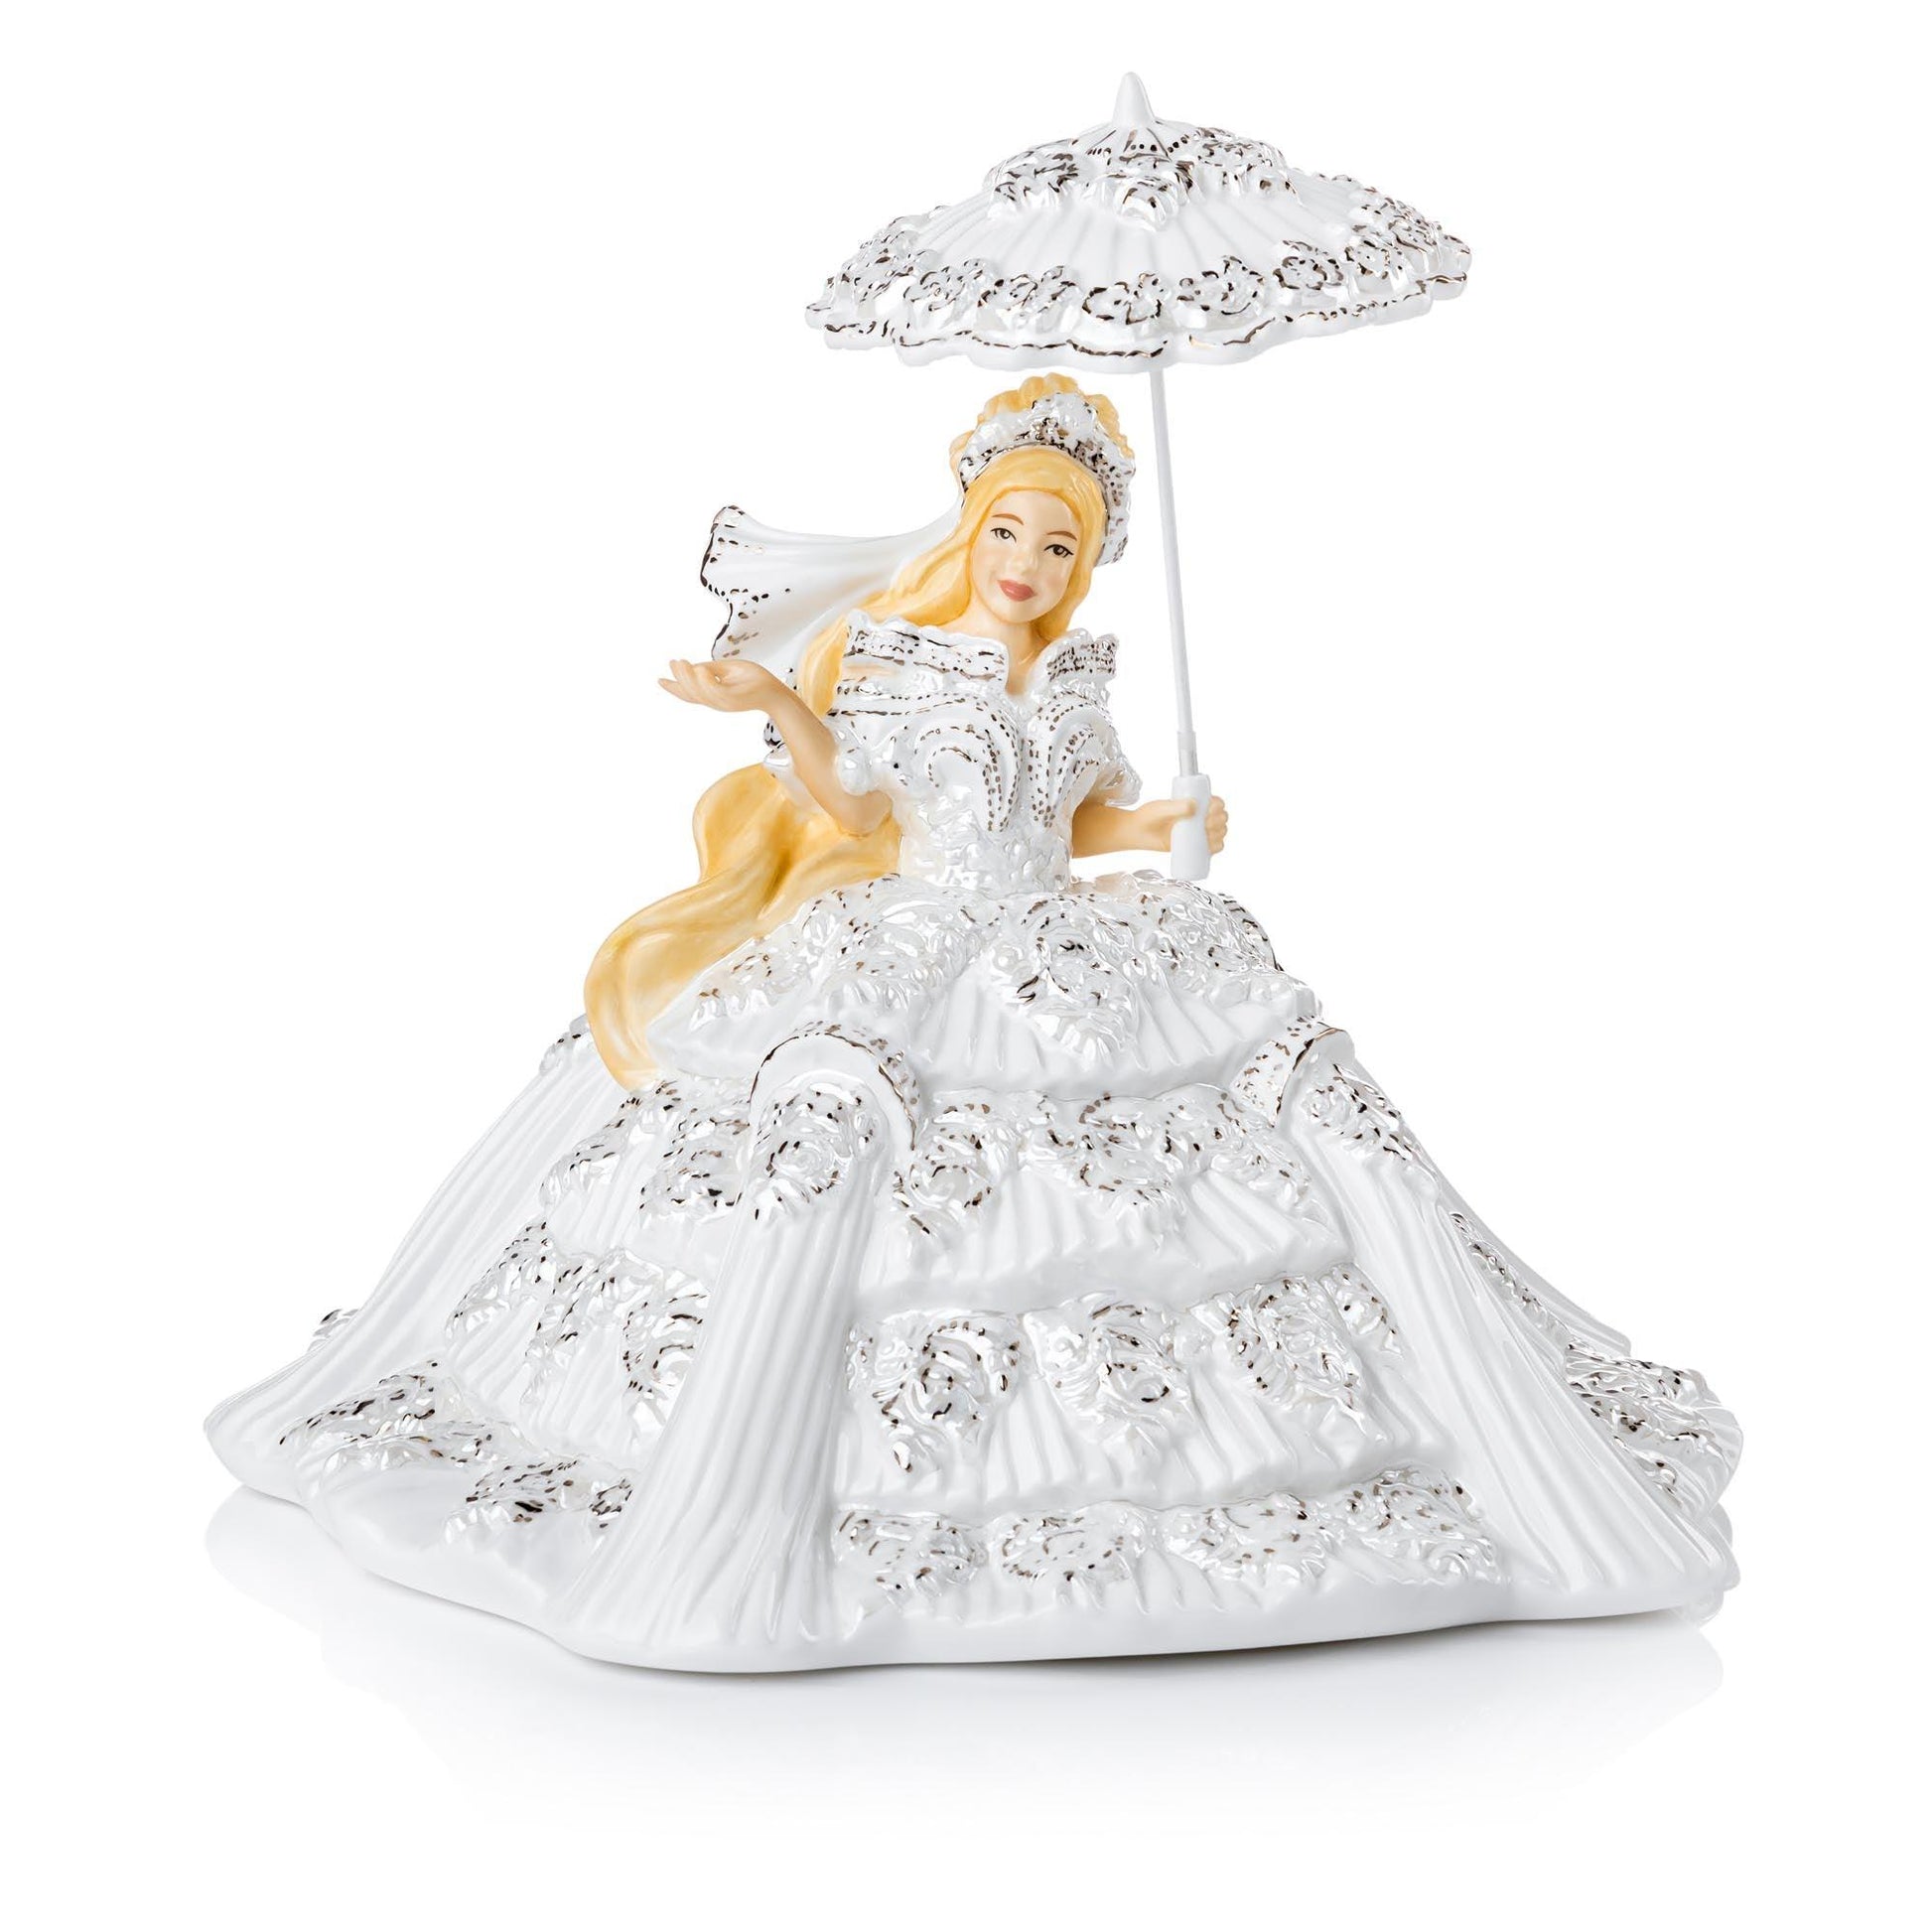 Perfect Little Princess - Blonde (English Ladies Co) - Gallery Gifts Online 